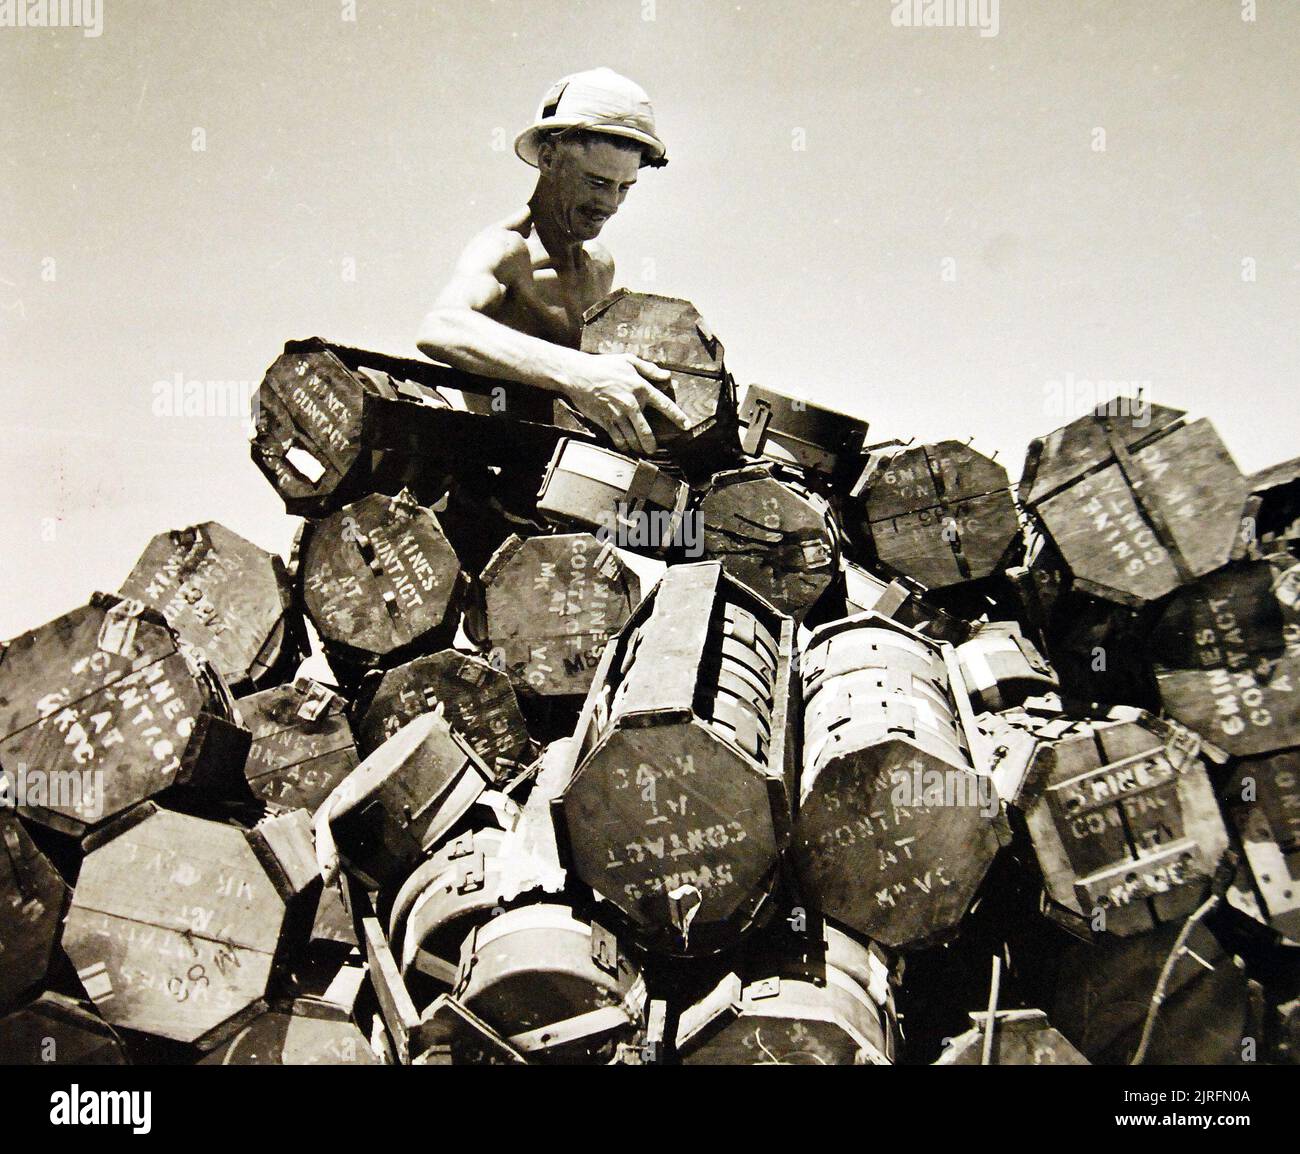 North African Campaign. The laying of mines is playing a big part in the battle and these pictures show South African engineers at work. Shown: Arranging the mines on the central stack. Stock Photo